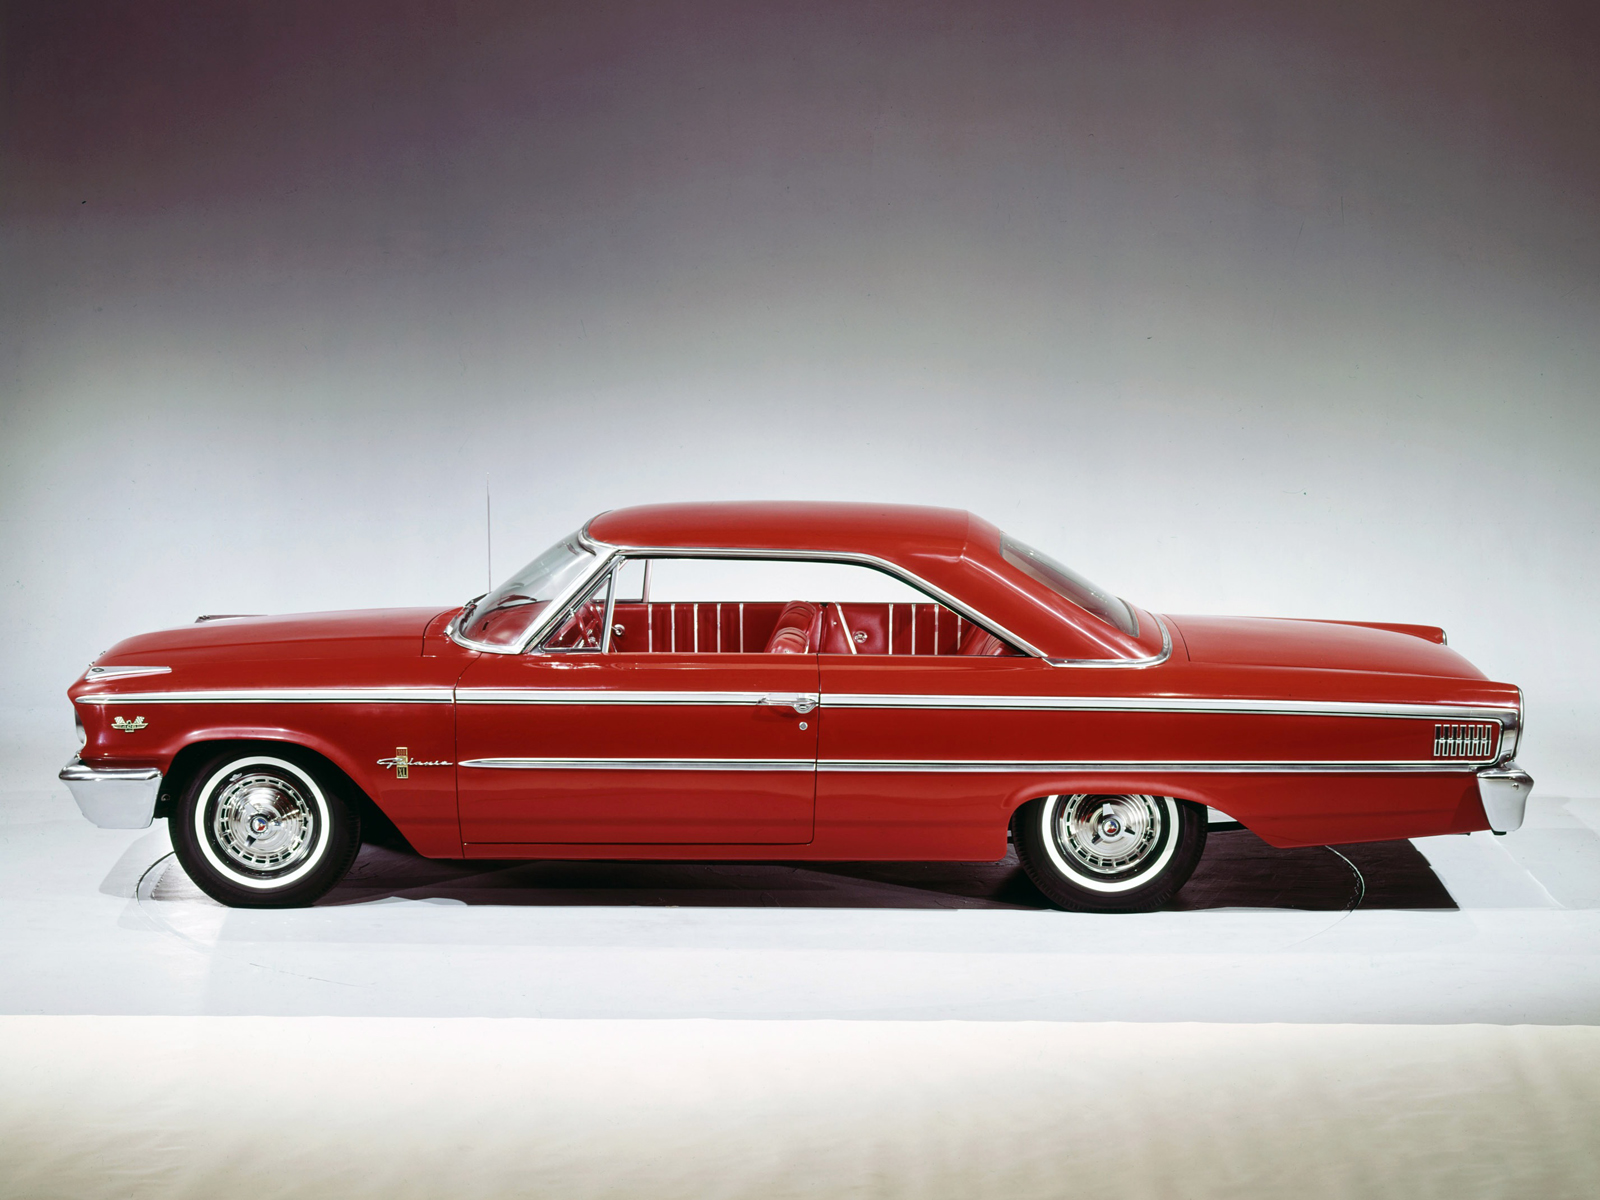 Ford Galaxie X L Hardtop Coupe Classic Hg Wallpaper Background